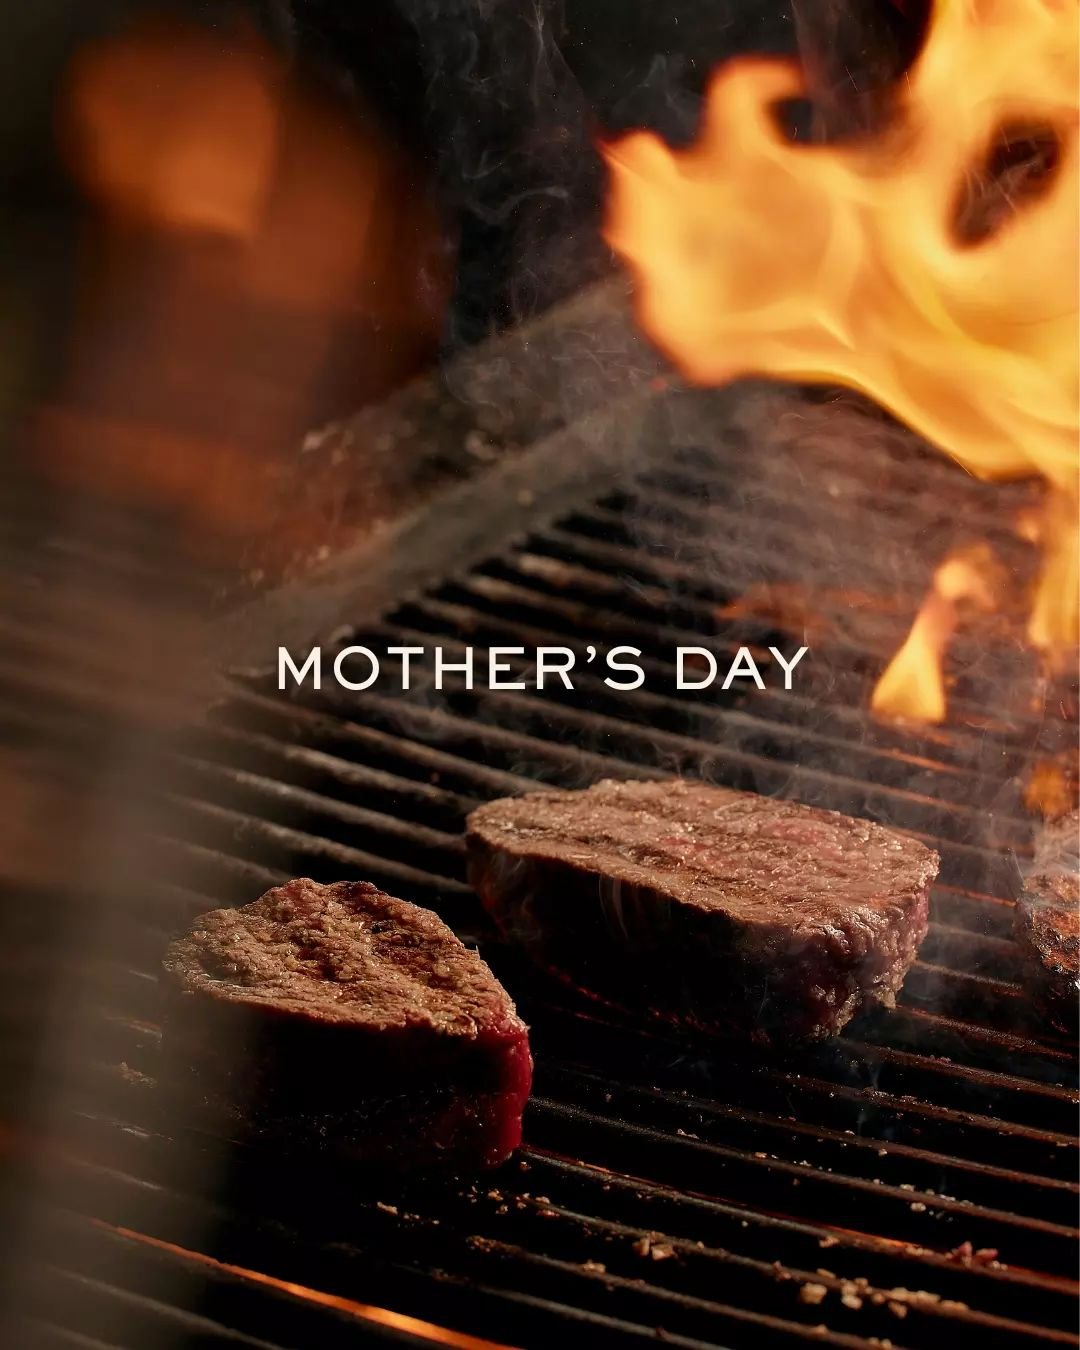 Join us at Angus this Mother&rsquo;s Day and treat mum to an incredible 3-course menu, designed to share with your nearest and dearest.&nbsp;

Sunday May 12th
Lunch are bookings available from 12pm and dinner from 5pm.

Head to the link in our bio to